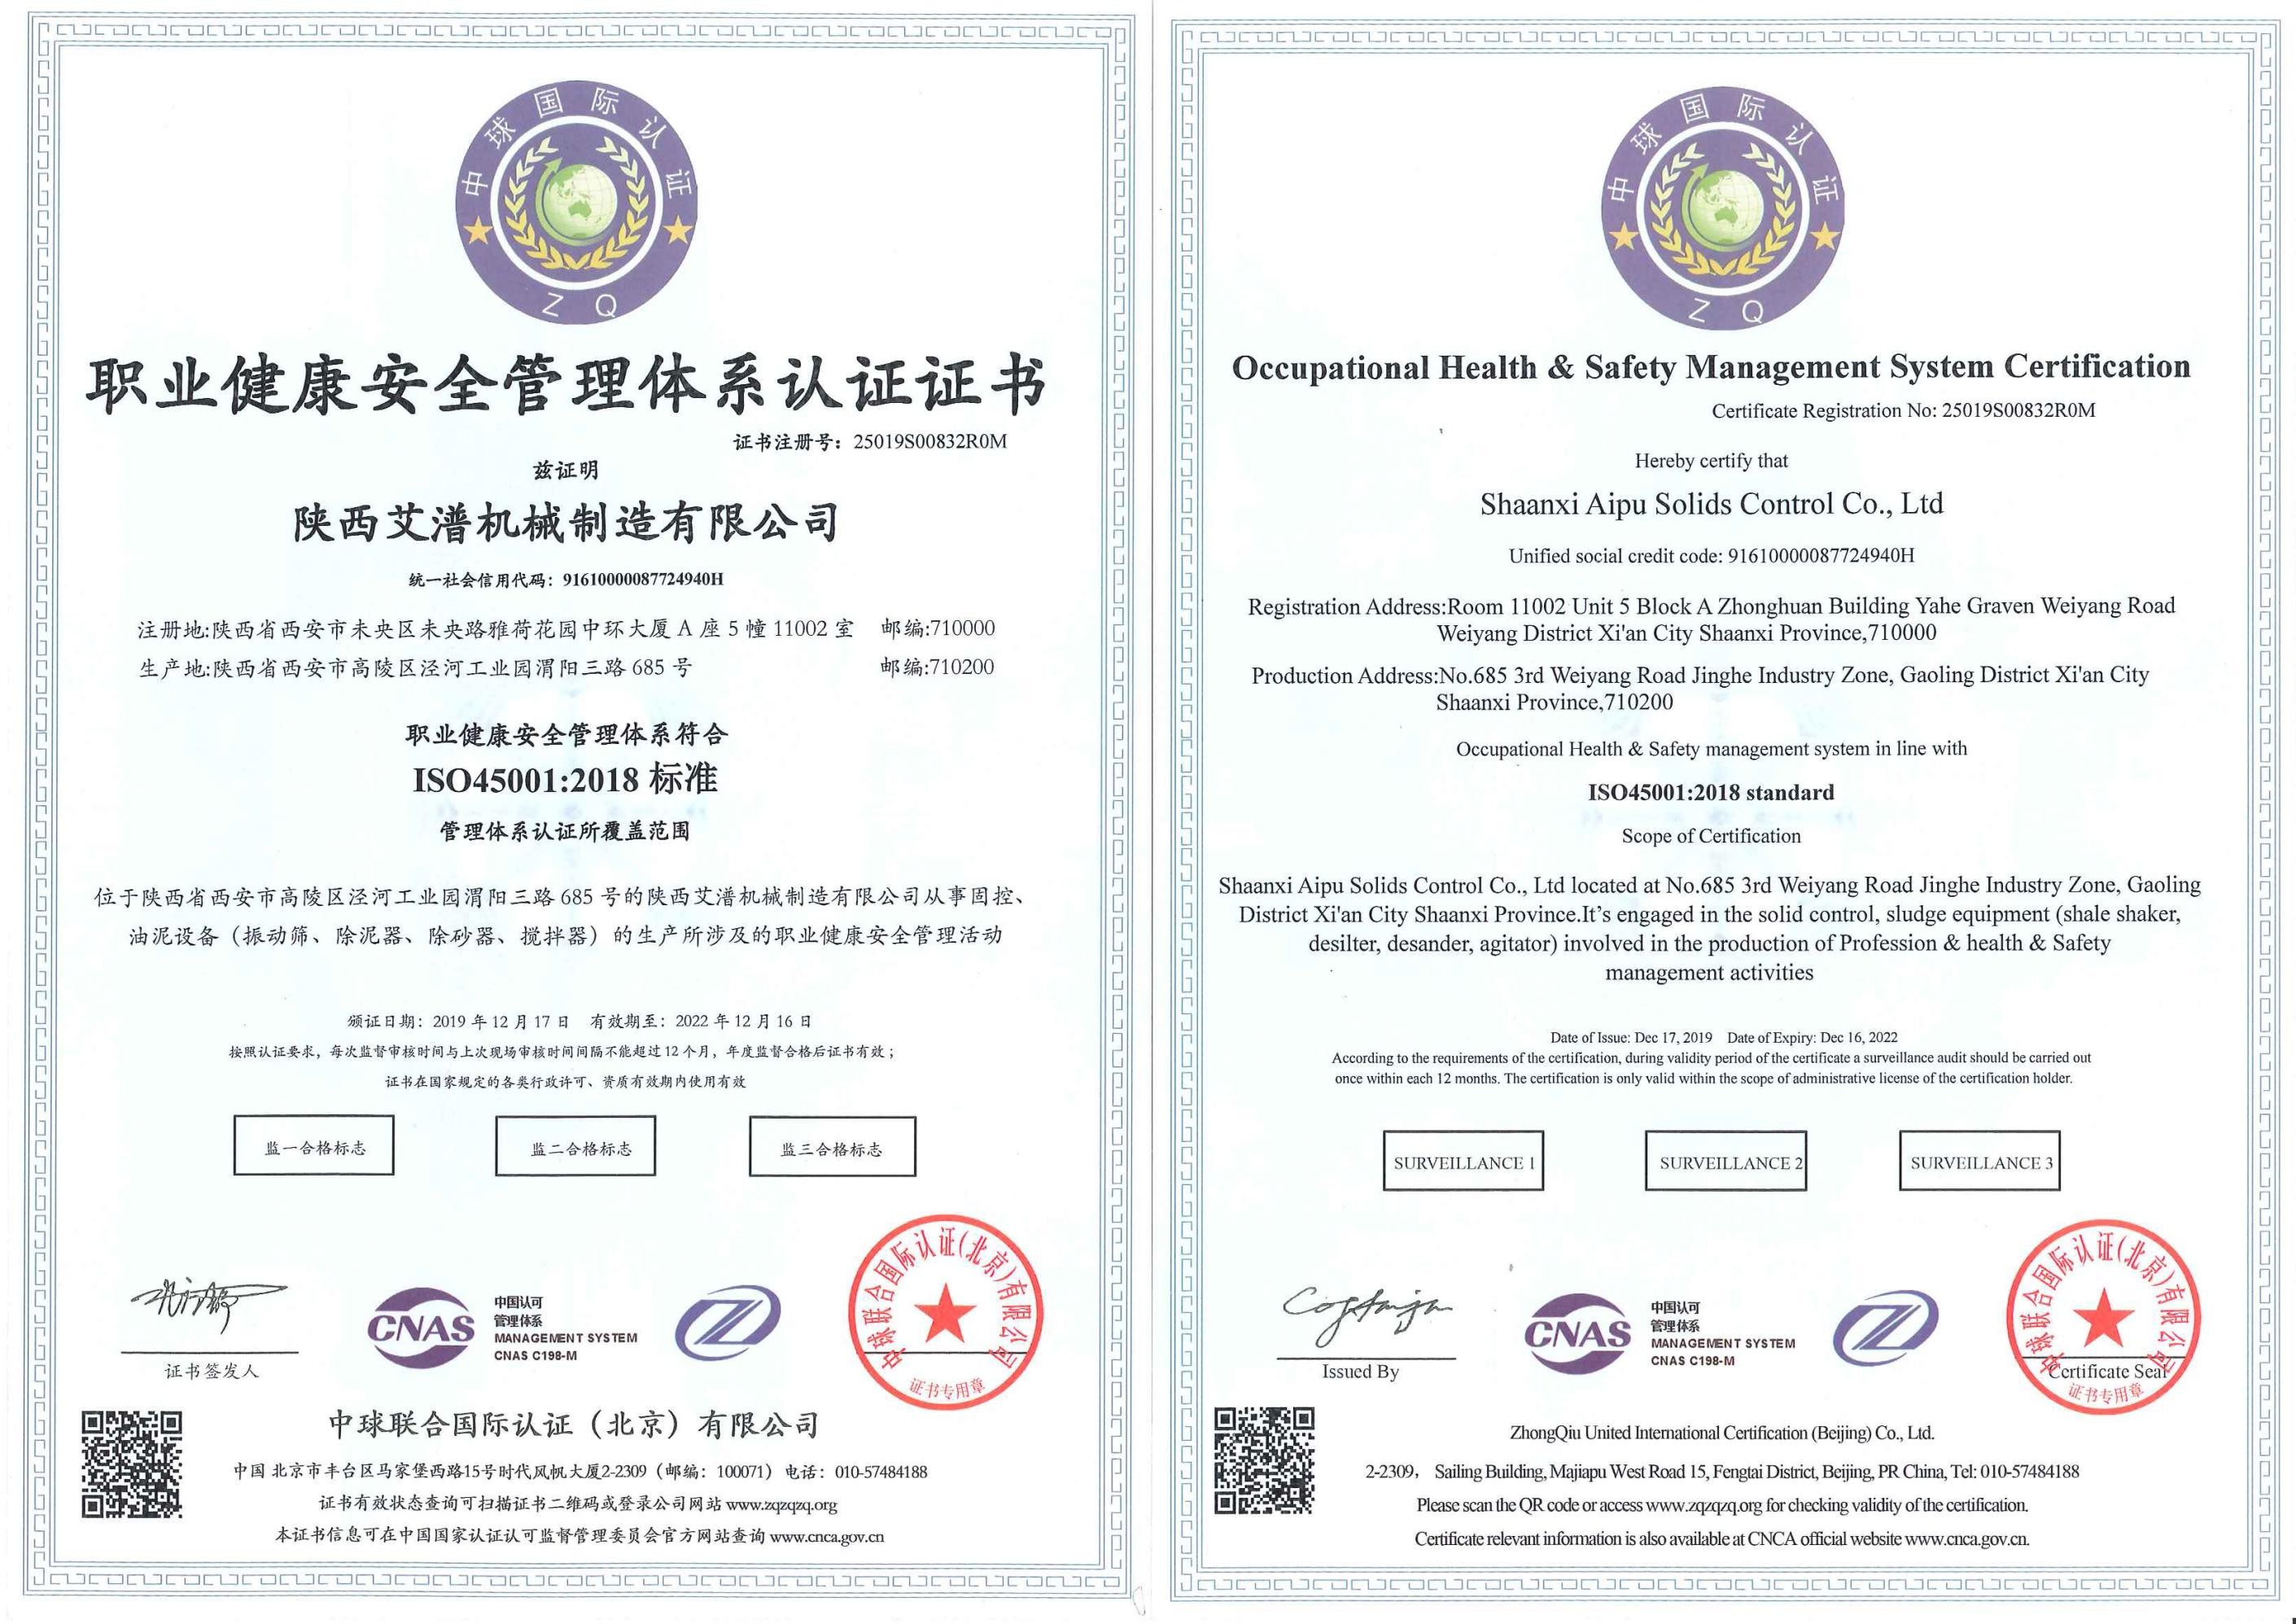 Shaanxi Aipu Solids Control Co., Ltd Certifications